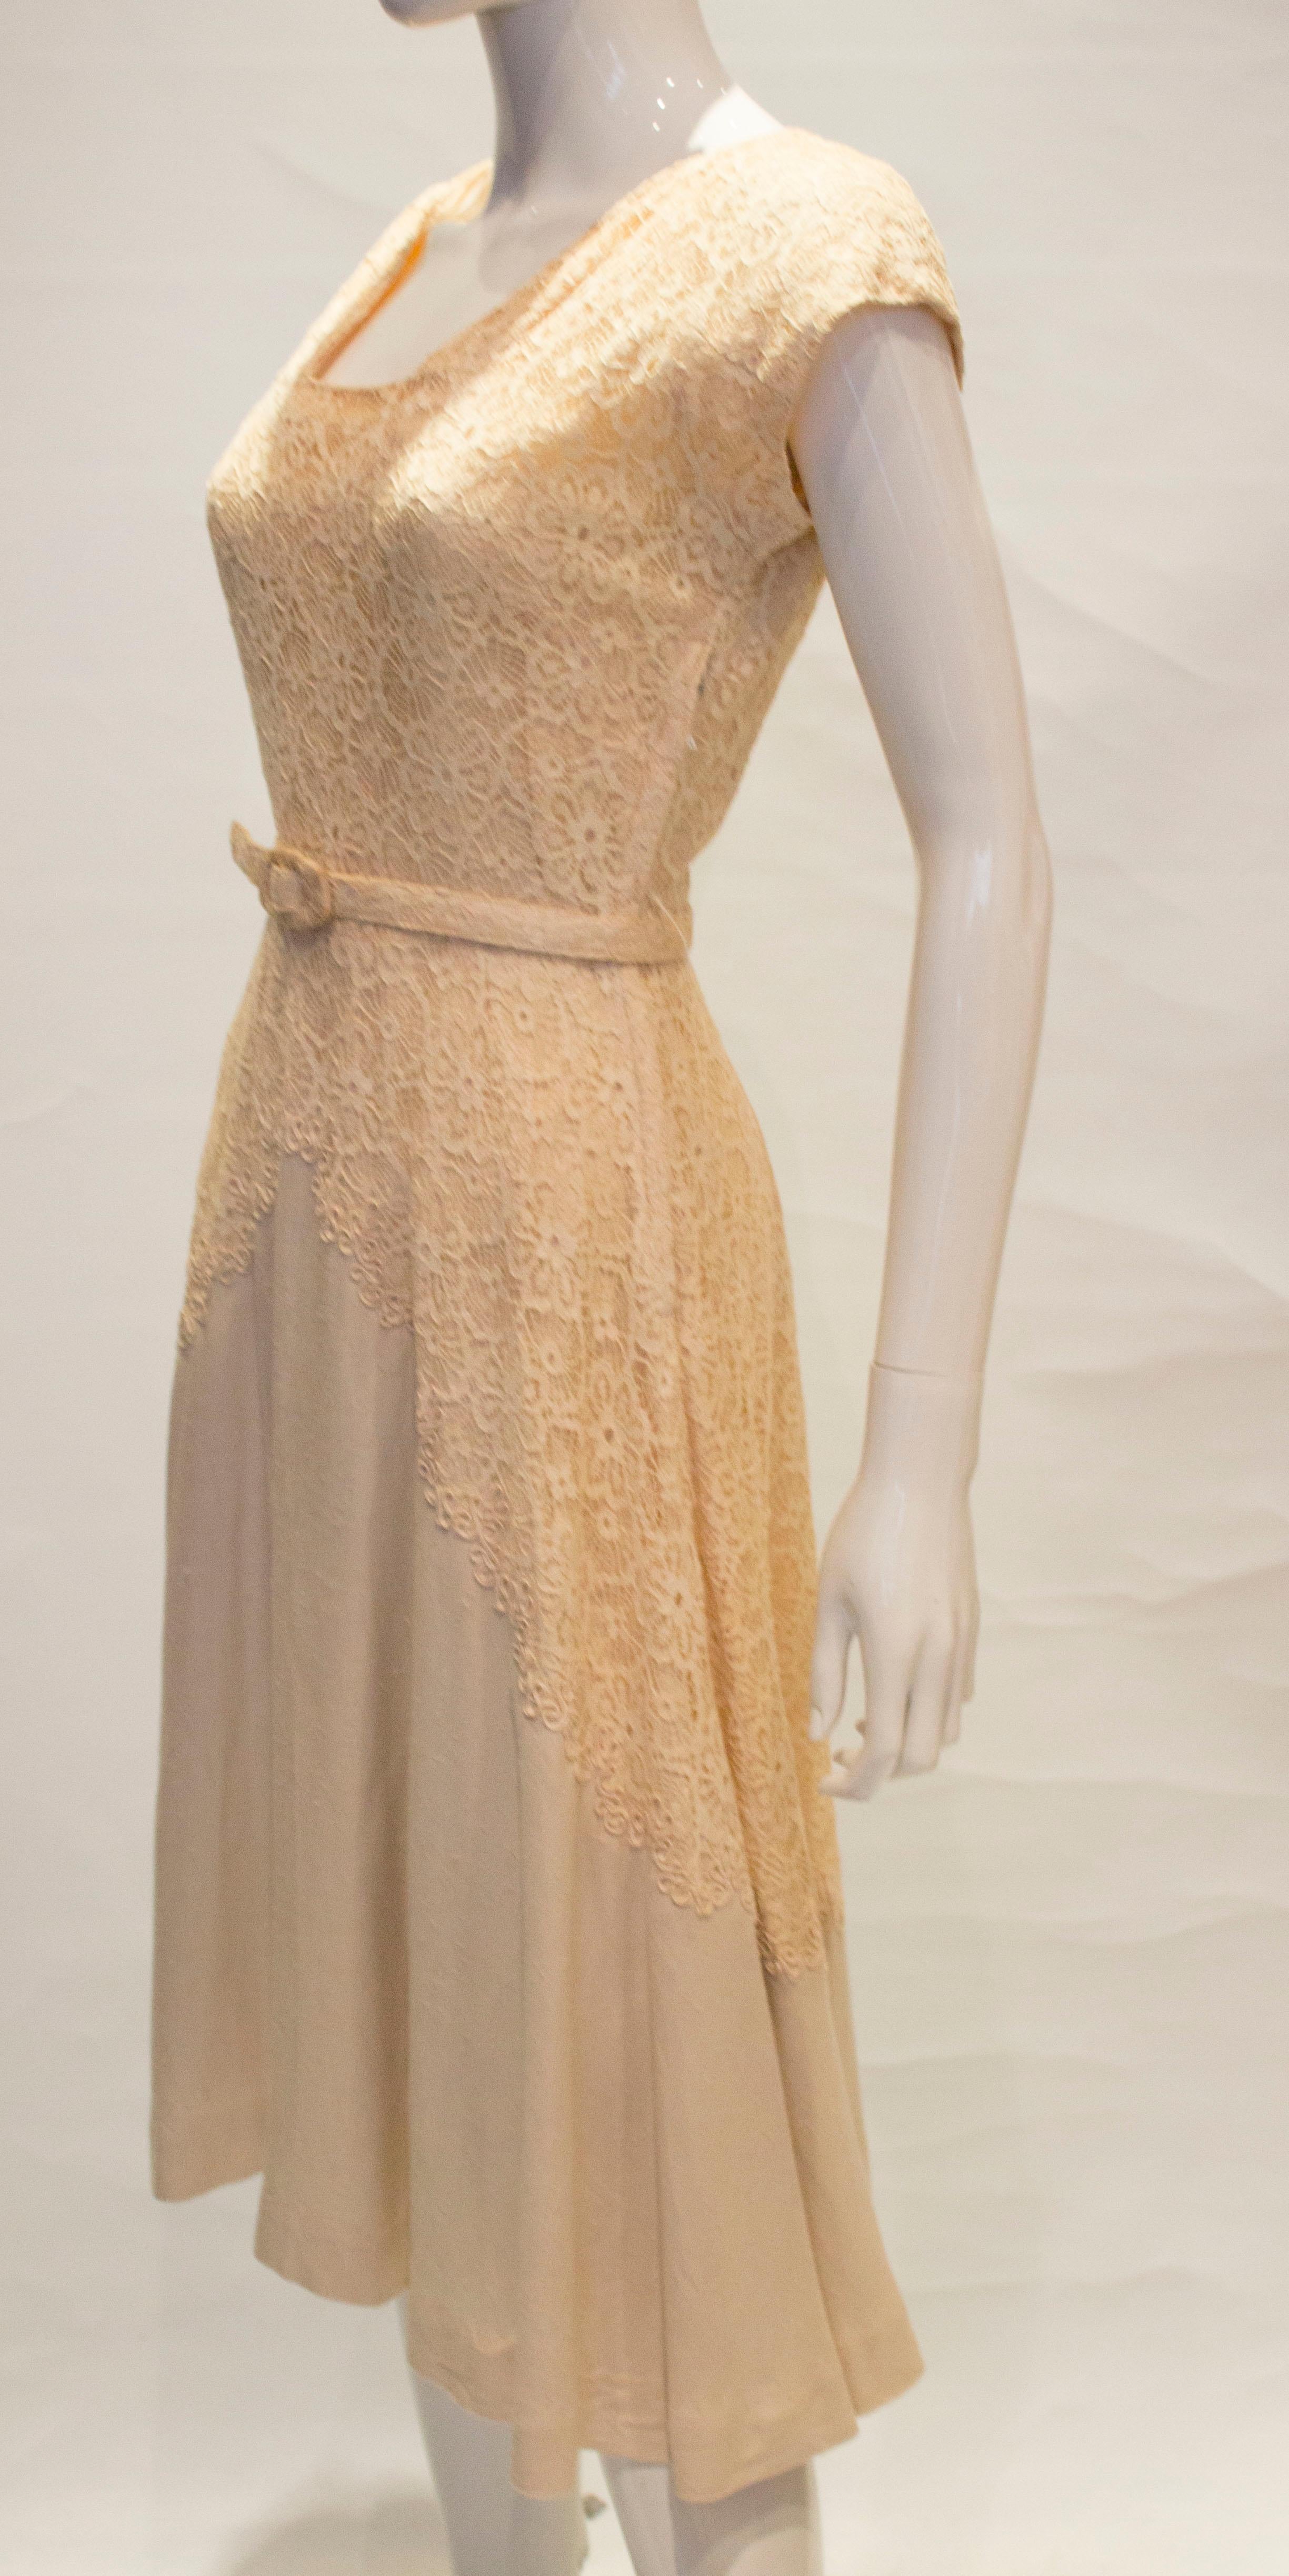 Women's Vintage Ivory and Lace Dress by Well Made London. For Sale